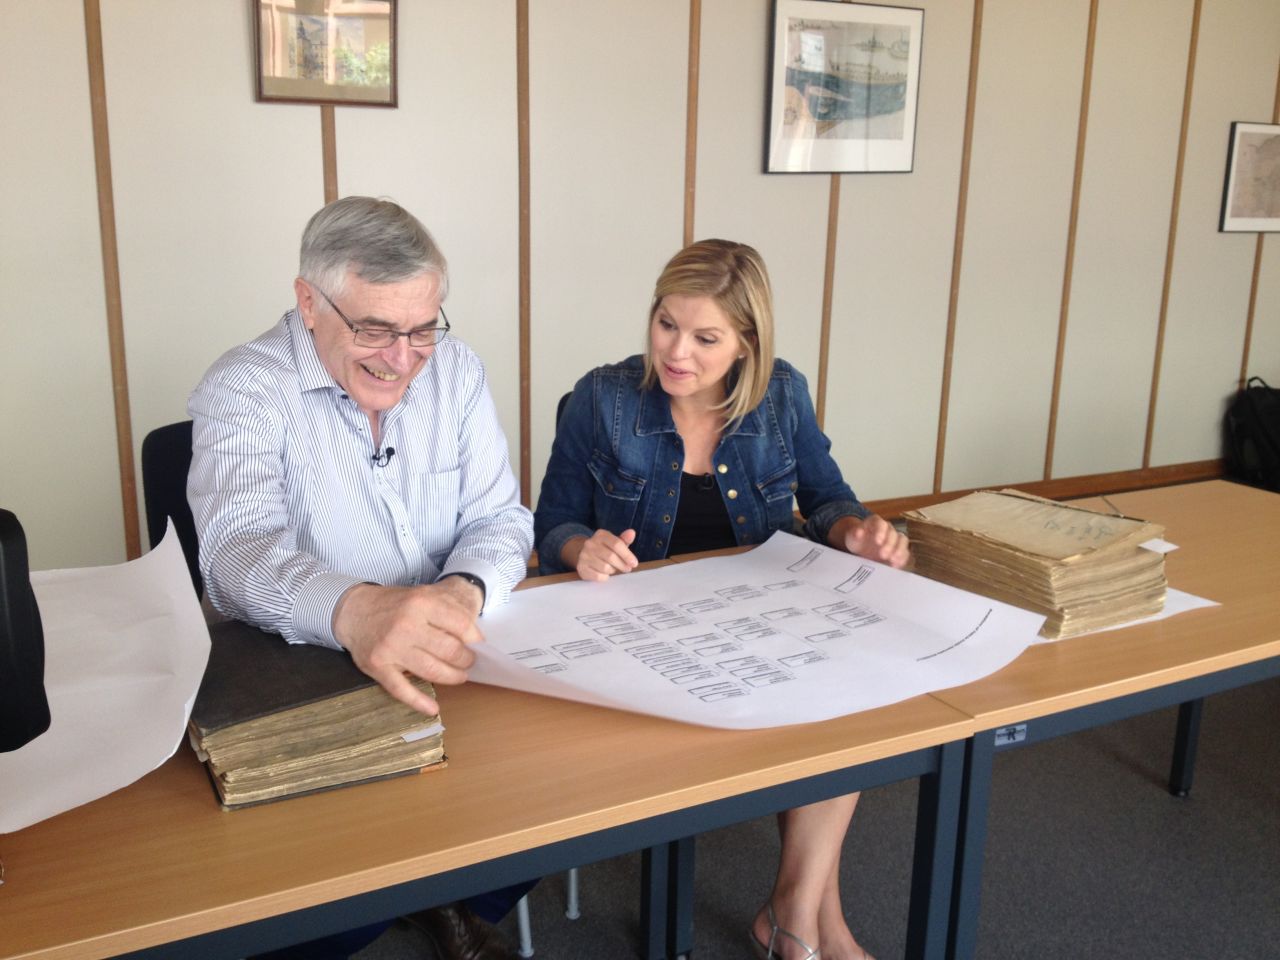 Bolduan recently traveled to Liege, Belgium, where local historian Alain van Wayenberge showed her a family tree dating back centuries.